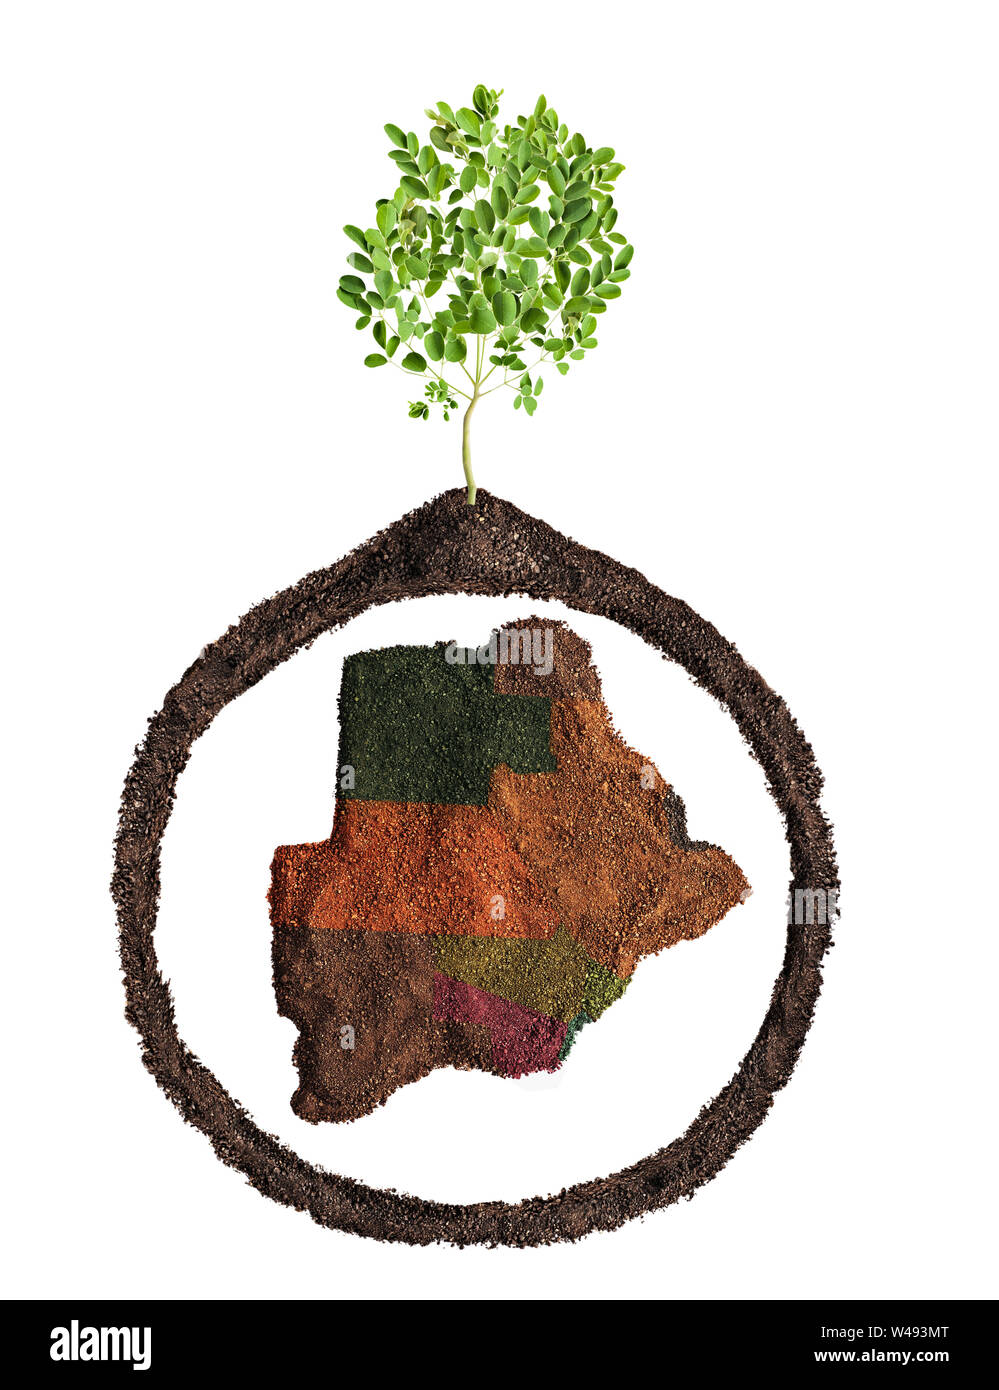 conceptual Botswana district map recycling or agriculture, growing a tree Stock Photo